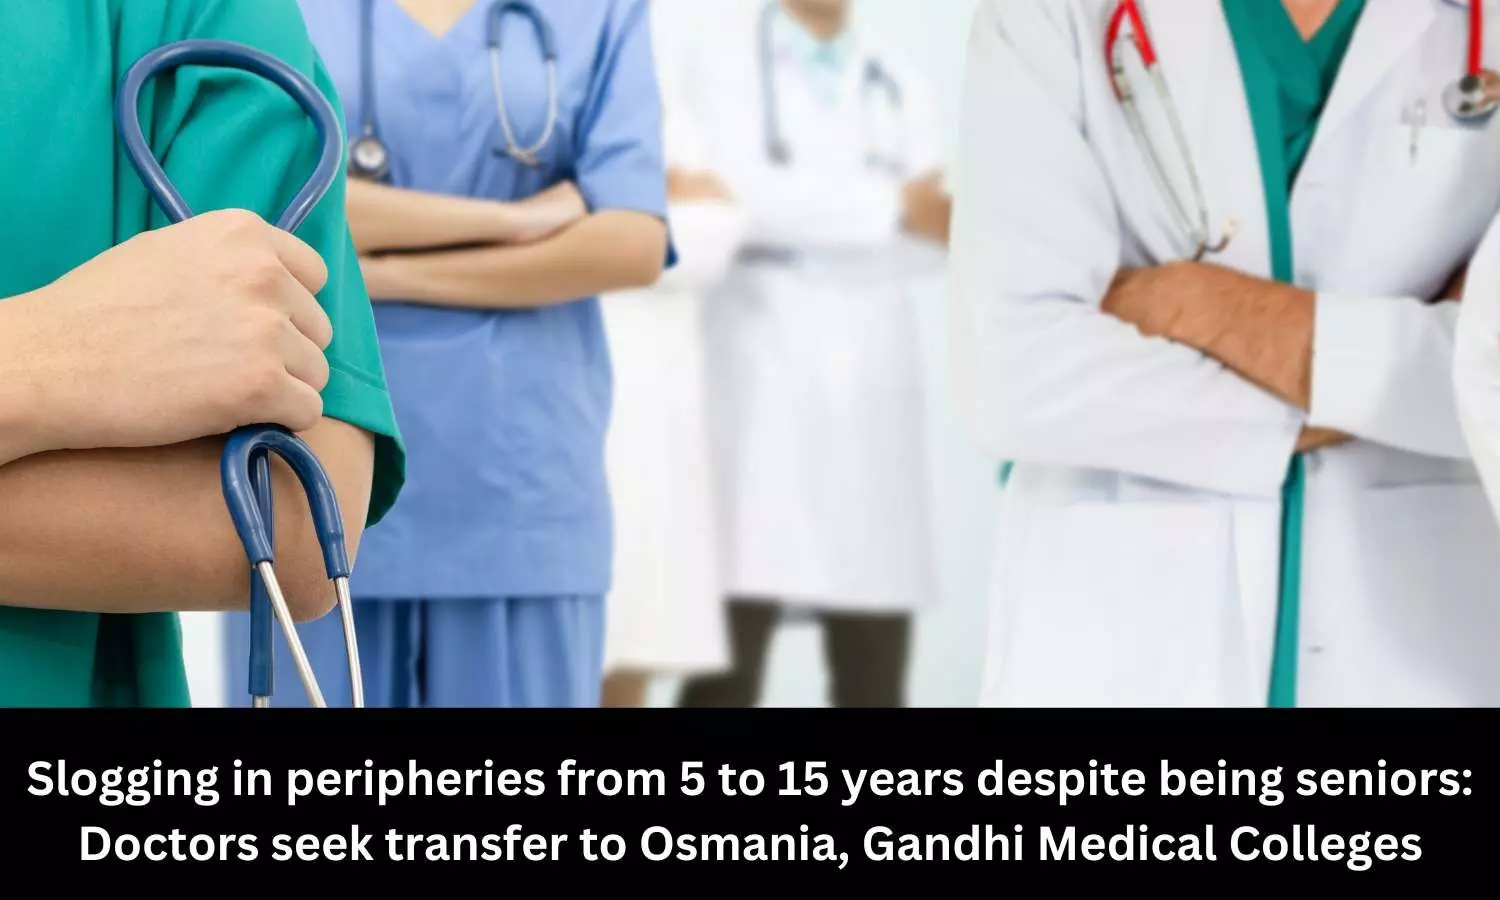 Slogging in peripheries from 5 to 15 years despite being seniors: Doctors seek transfer to Osmania, Gandhi Medical Colleges